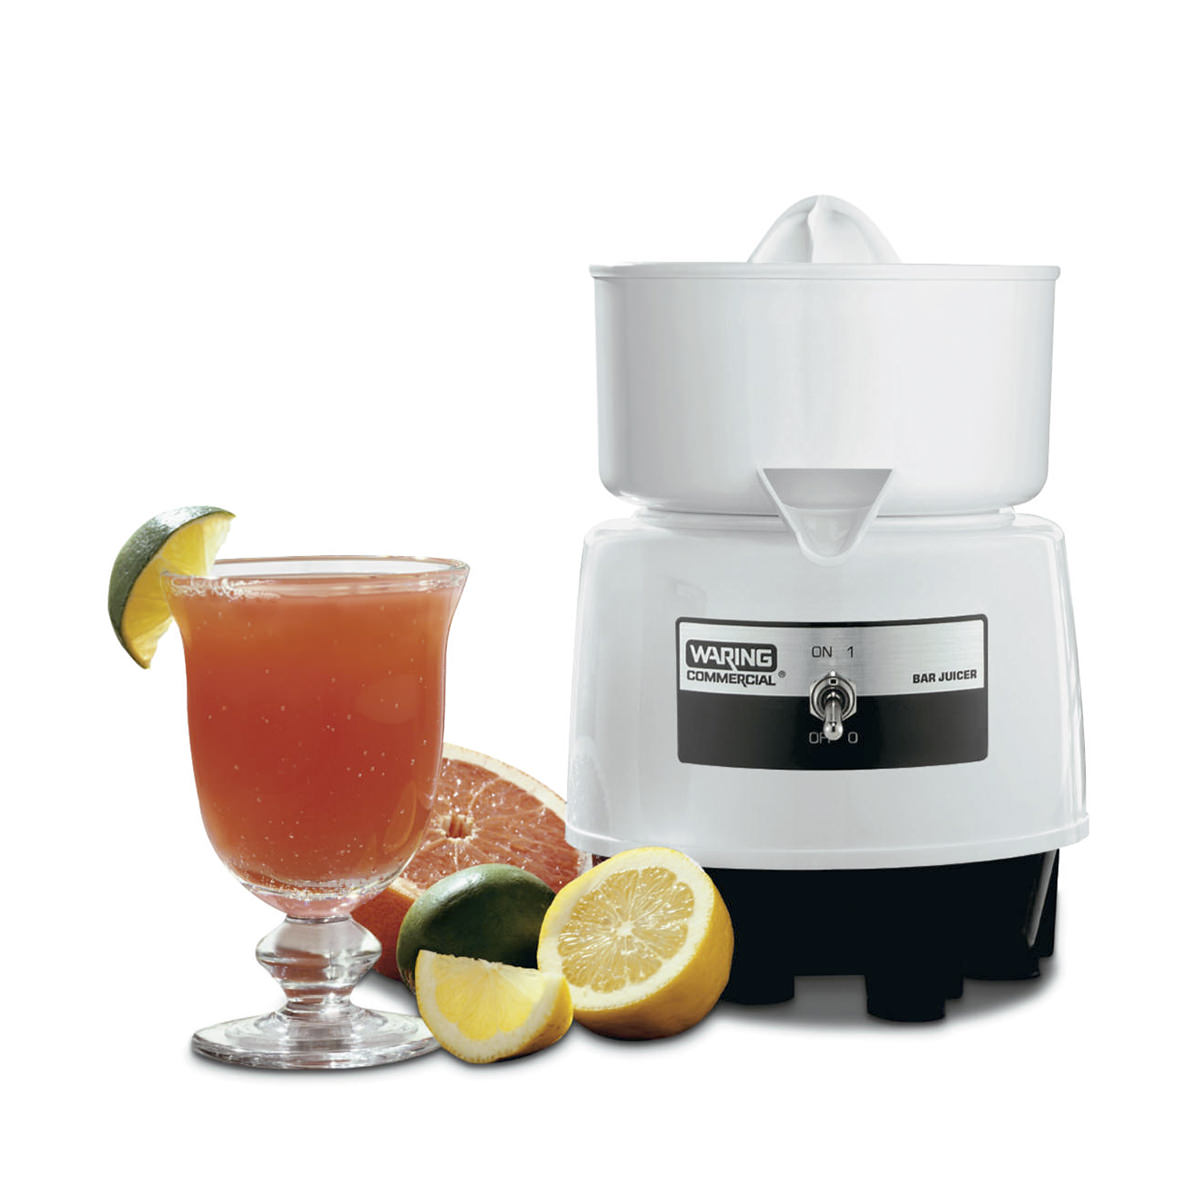 Waring 1 Litre Bar Juicer in Bar Juicer from Simplex Trading